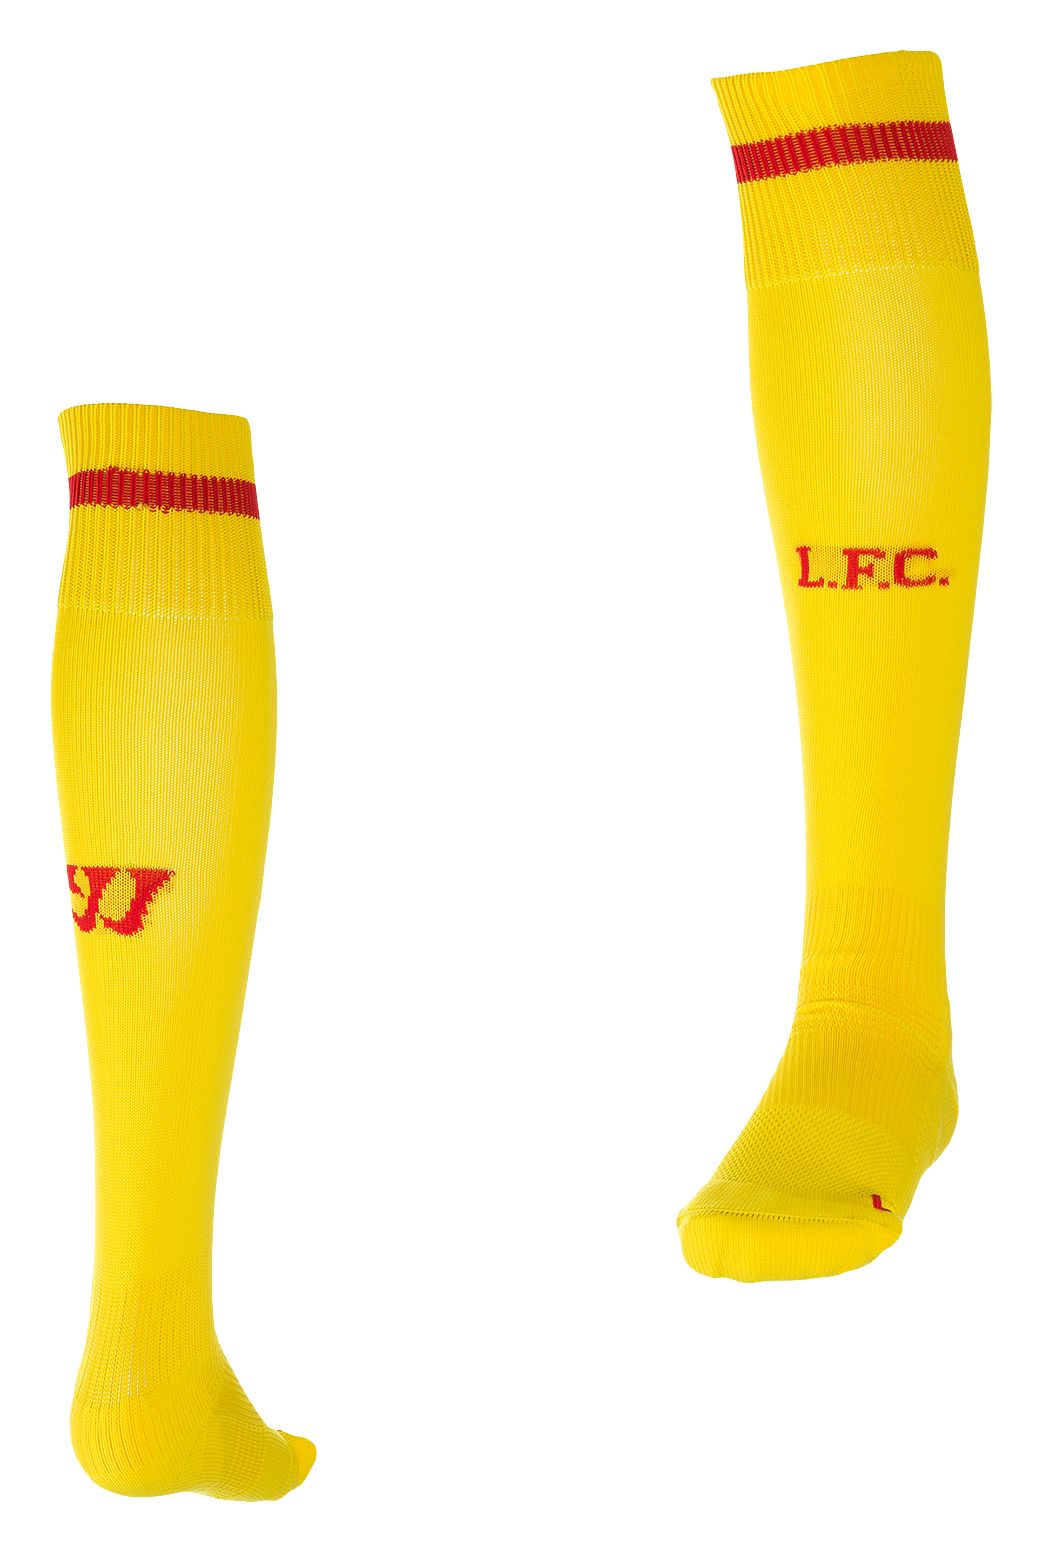 Liverpool Away Sock 2014/15, Cyber Yellow with High Risk Red image number 0